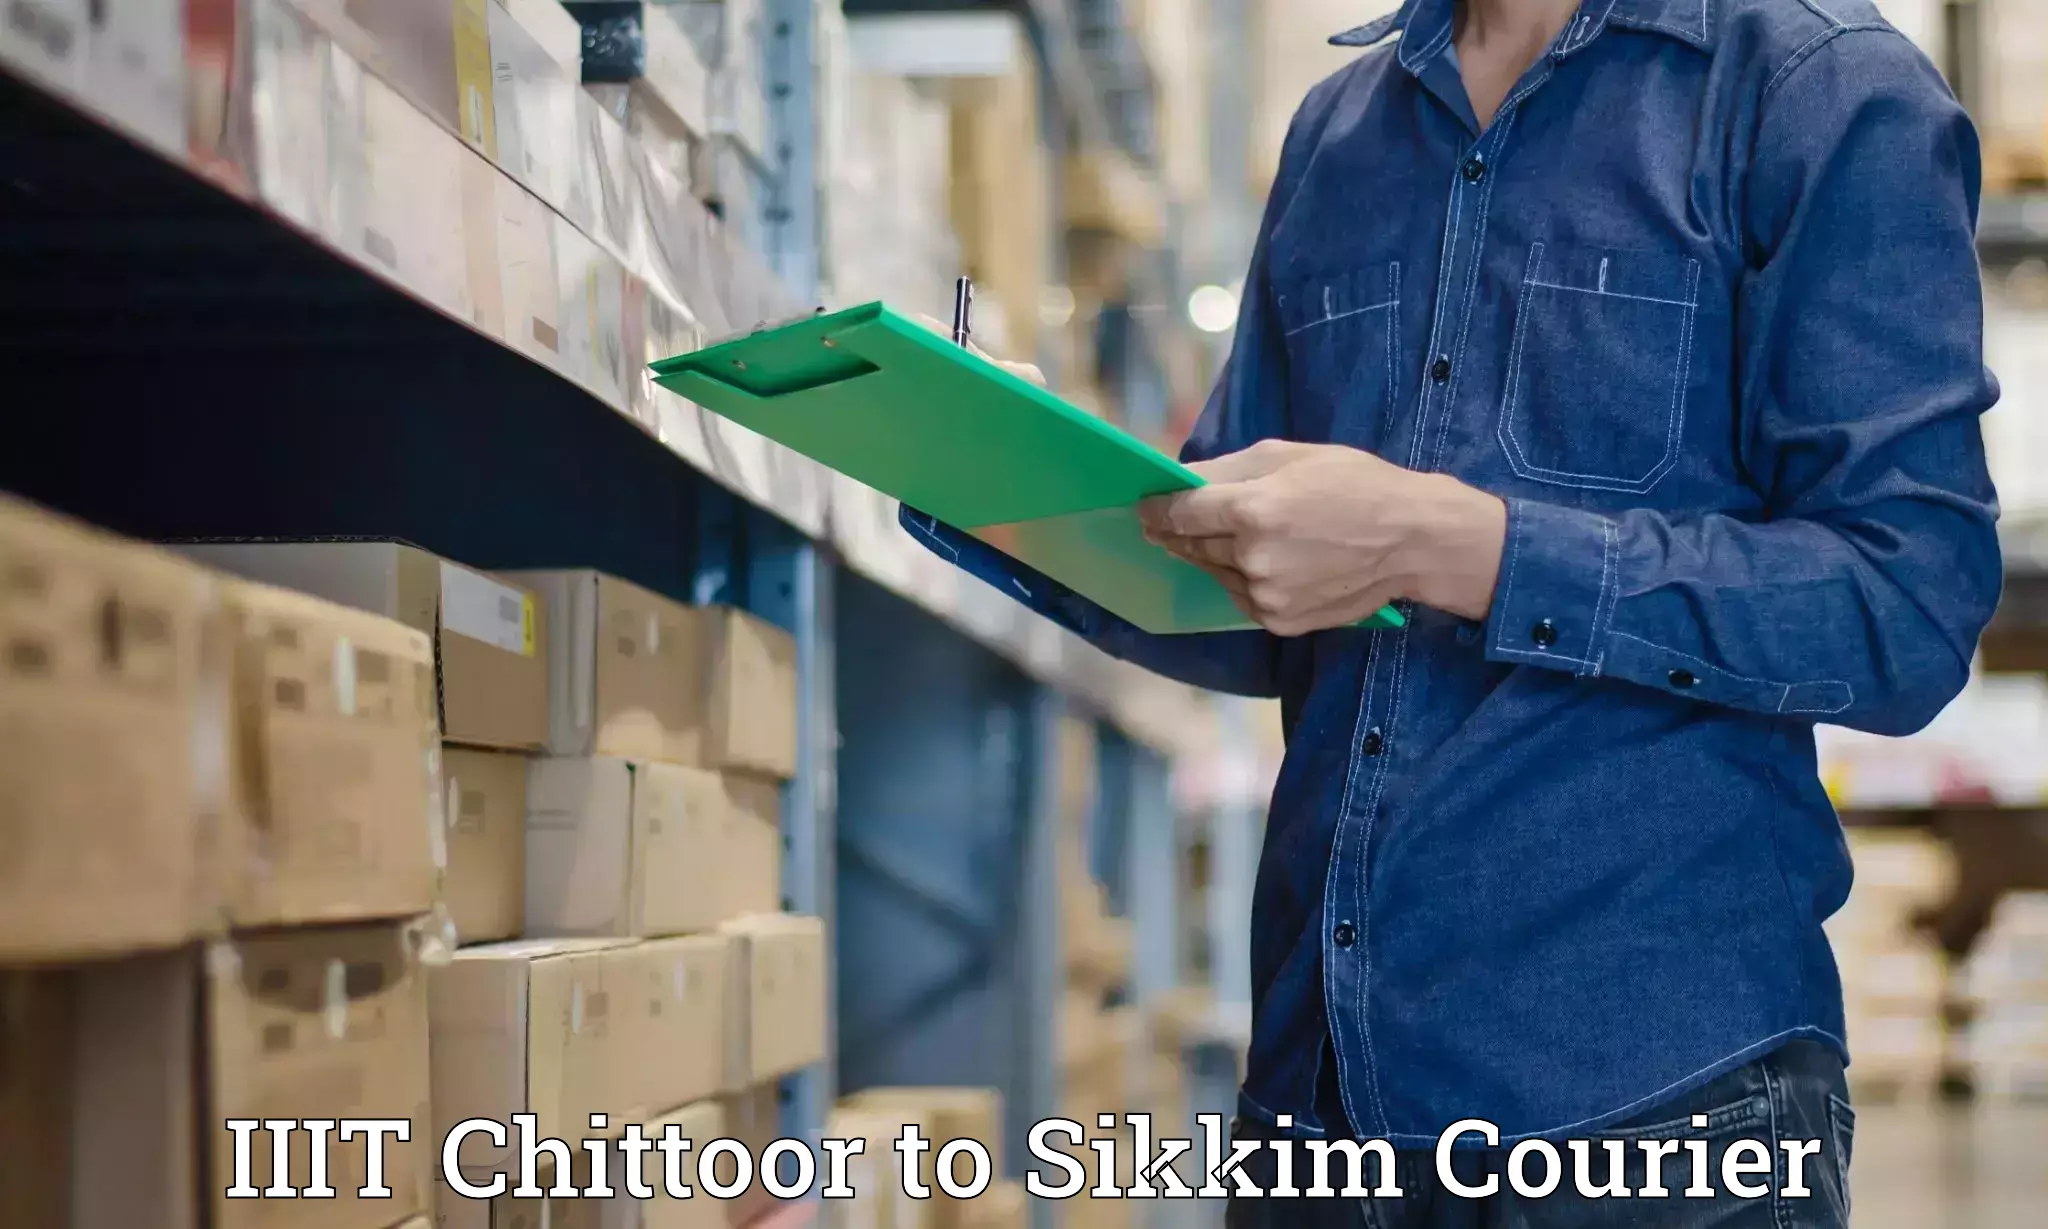 Courier service partnerships IIIT Chittoor to Ranipool